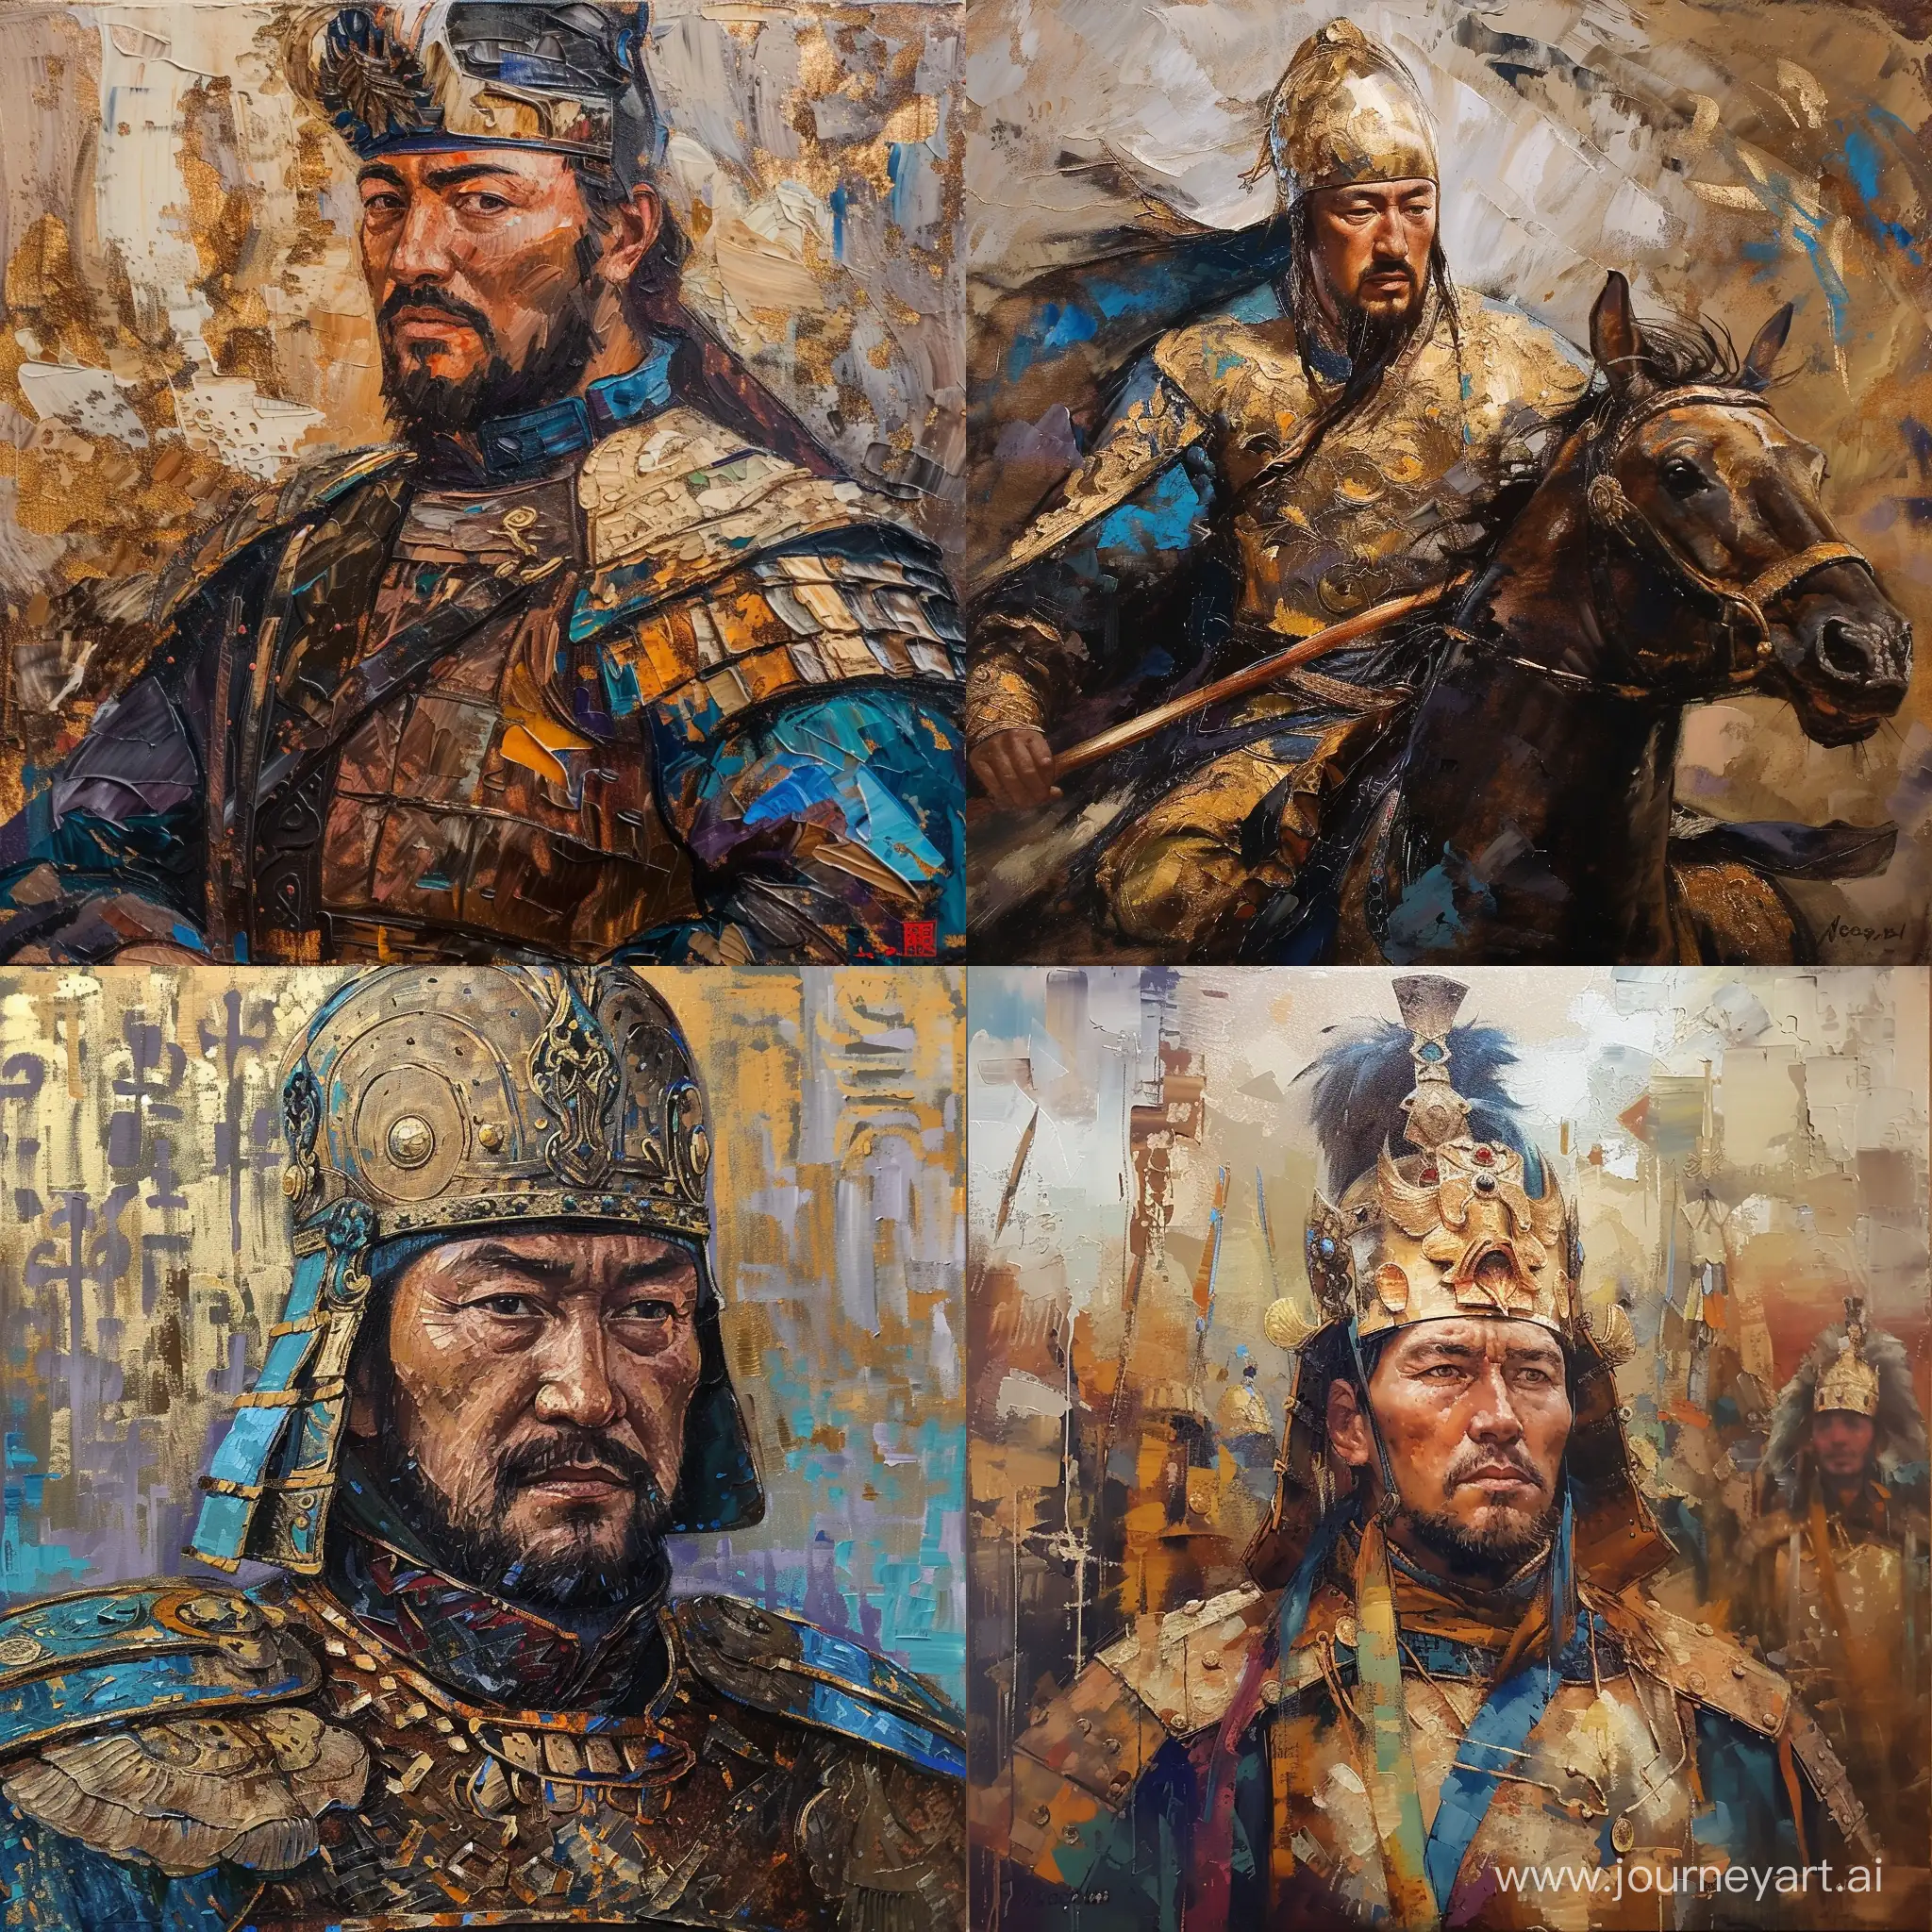 kazakh hero, Oil painting, Traditional canvas, Likely modern (20th or 21st century), Earthy and metallic colors with a focus on browns, golds, and blues.